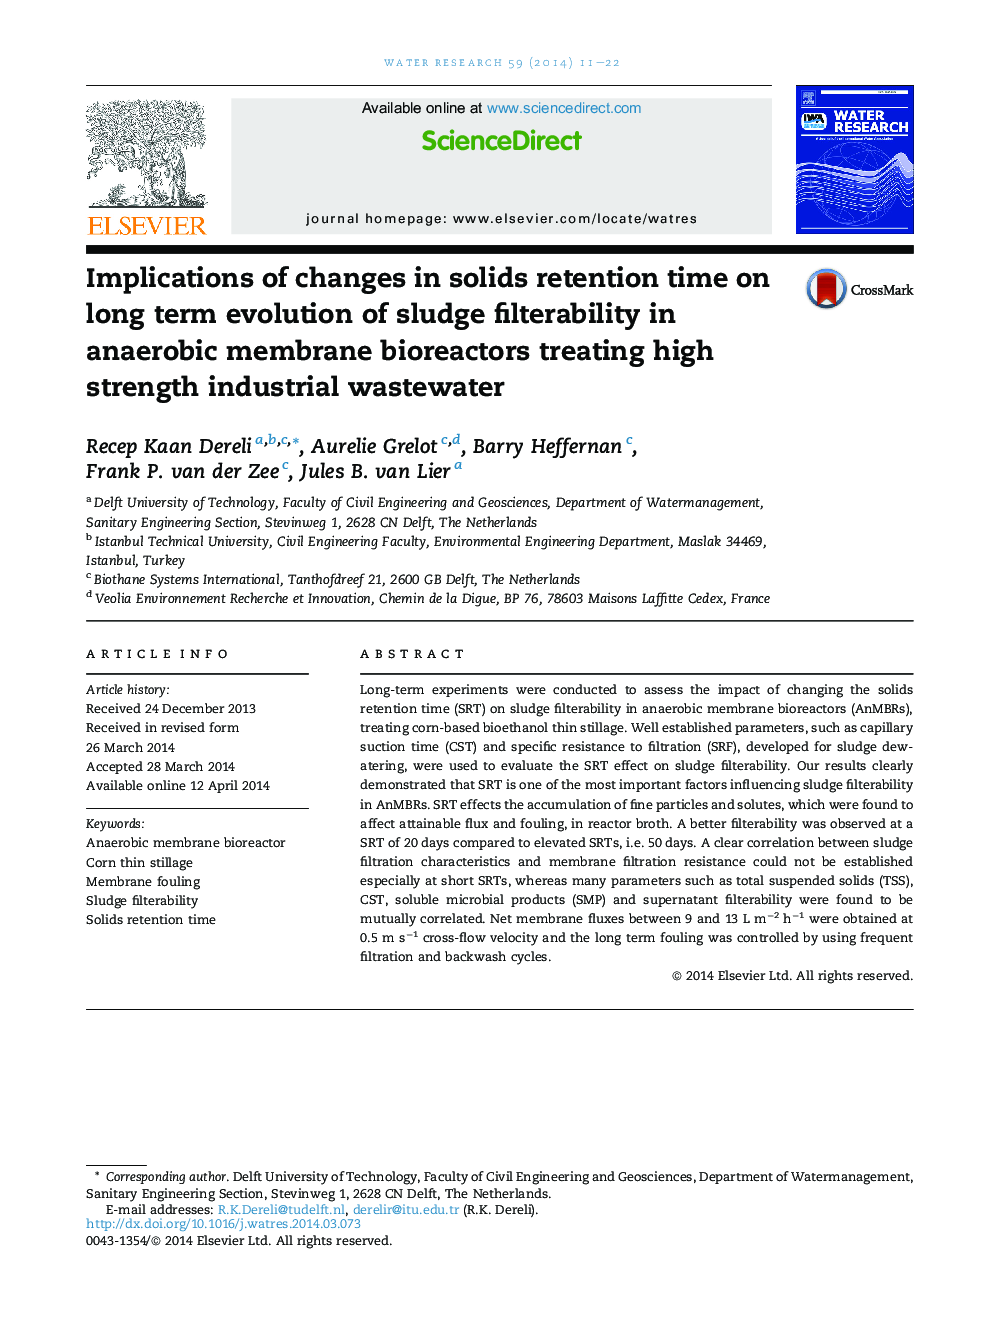 Implications of changes in solids retention time on long term evolution of sludge filterability in anaerobic membrane bioreactors treating high strength industrial wastewater